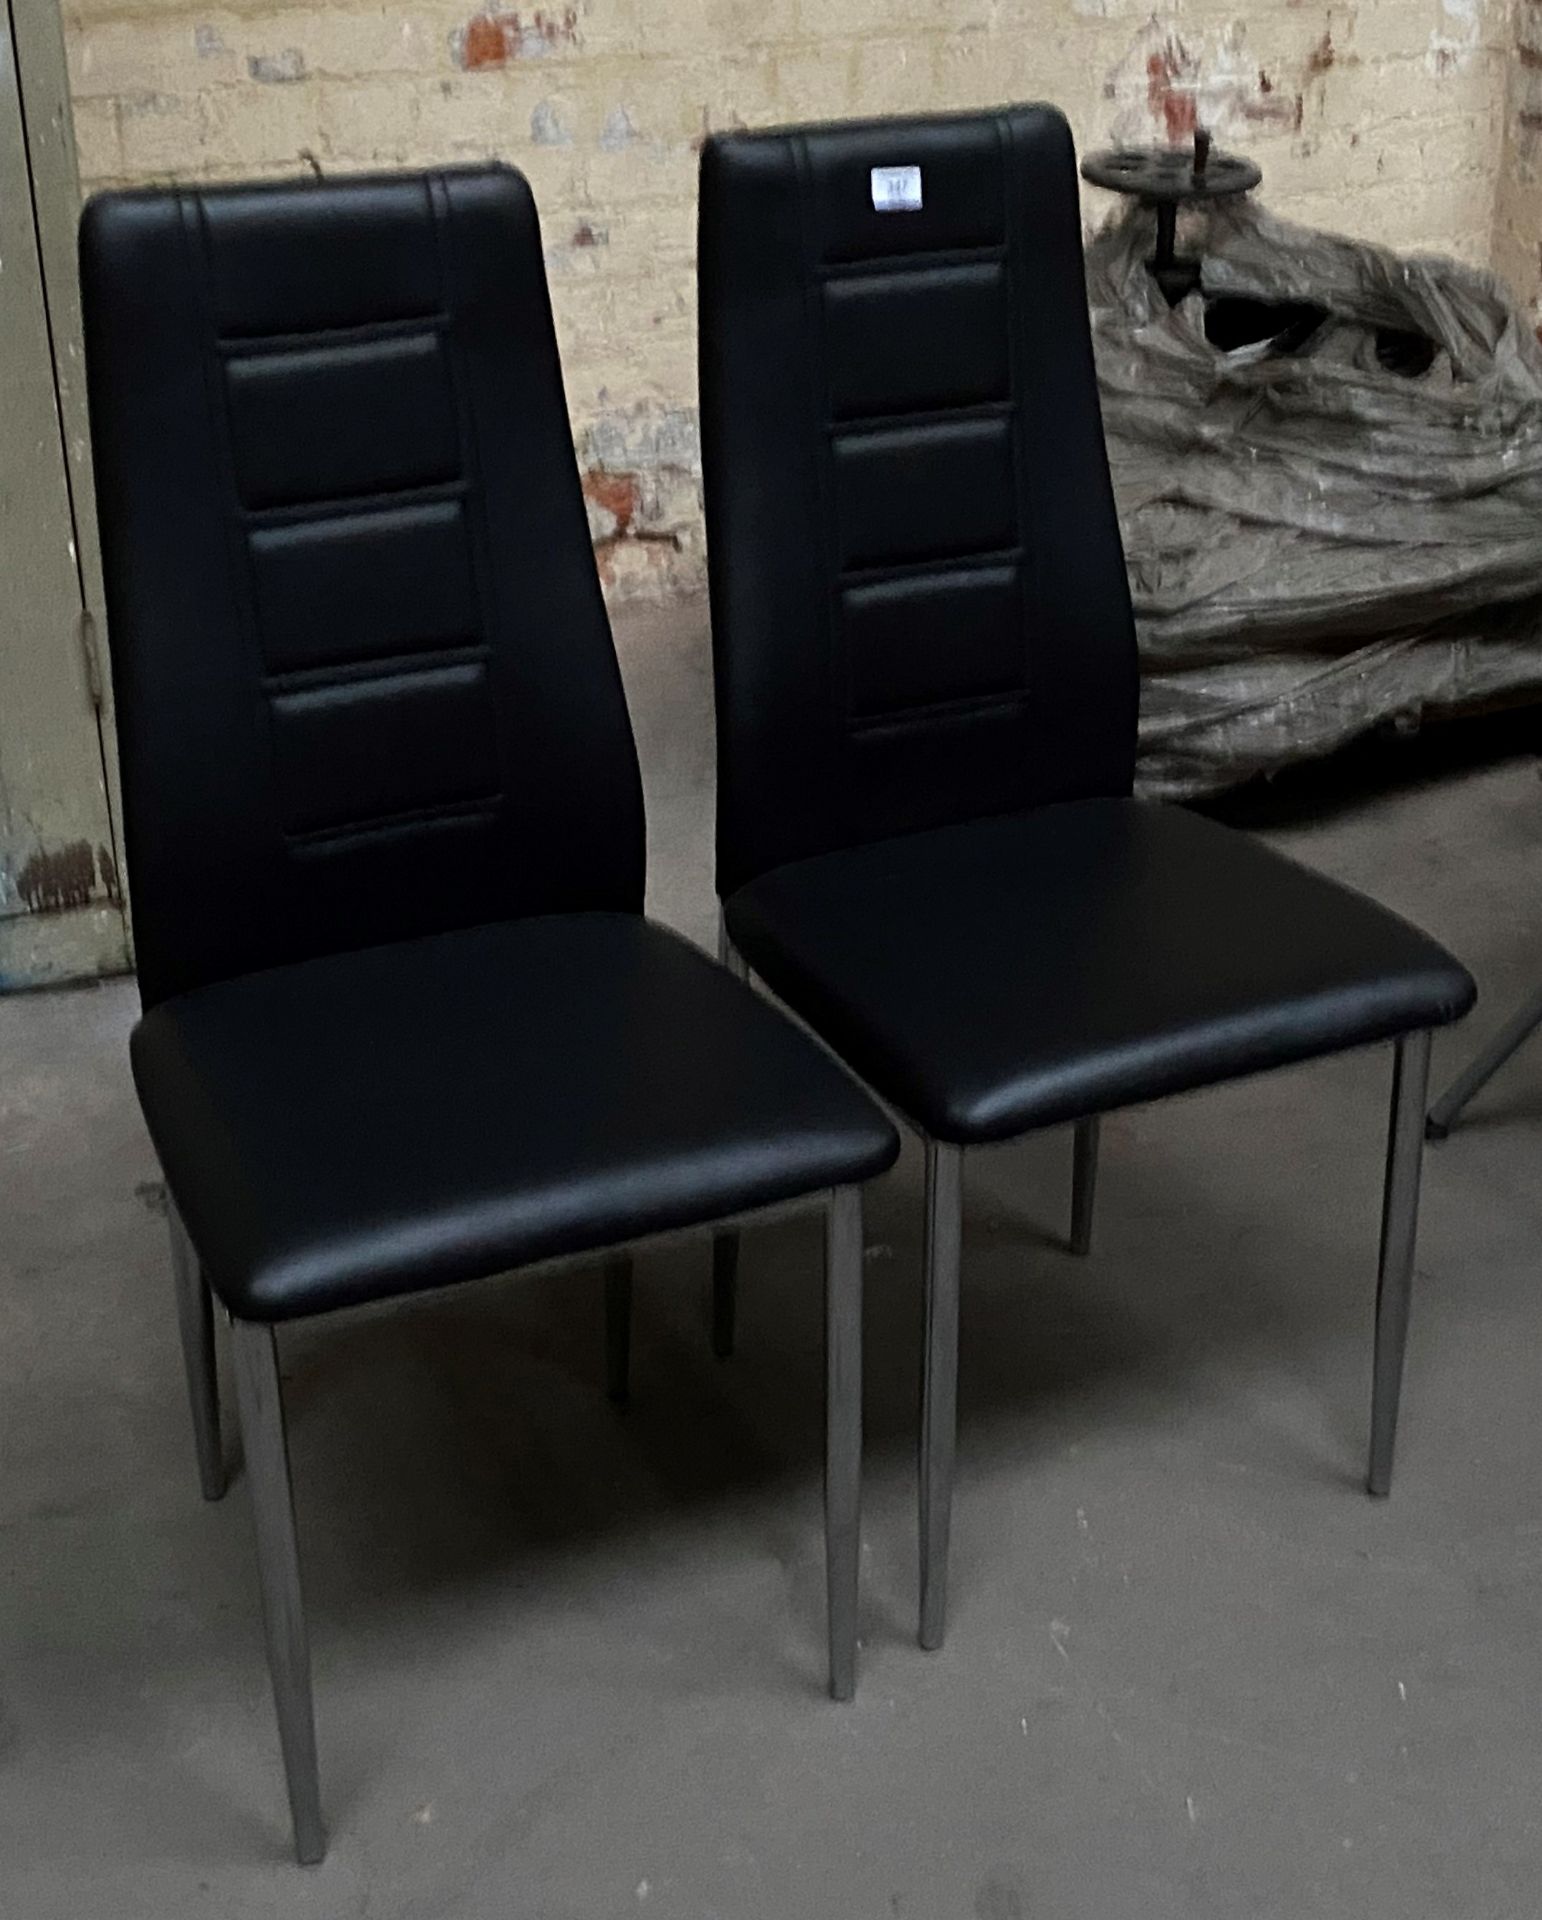 Two black faux leather dining chairs